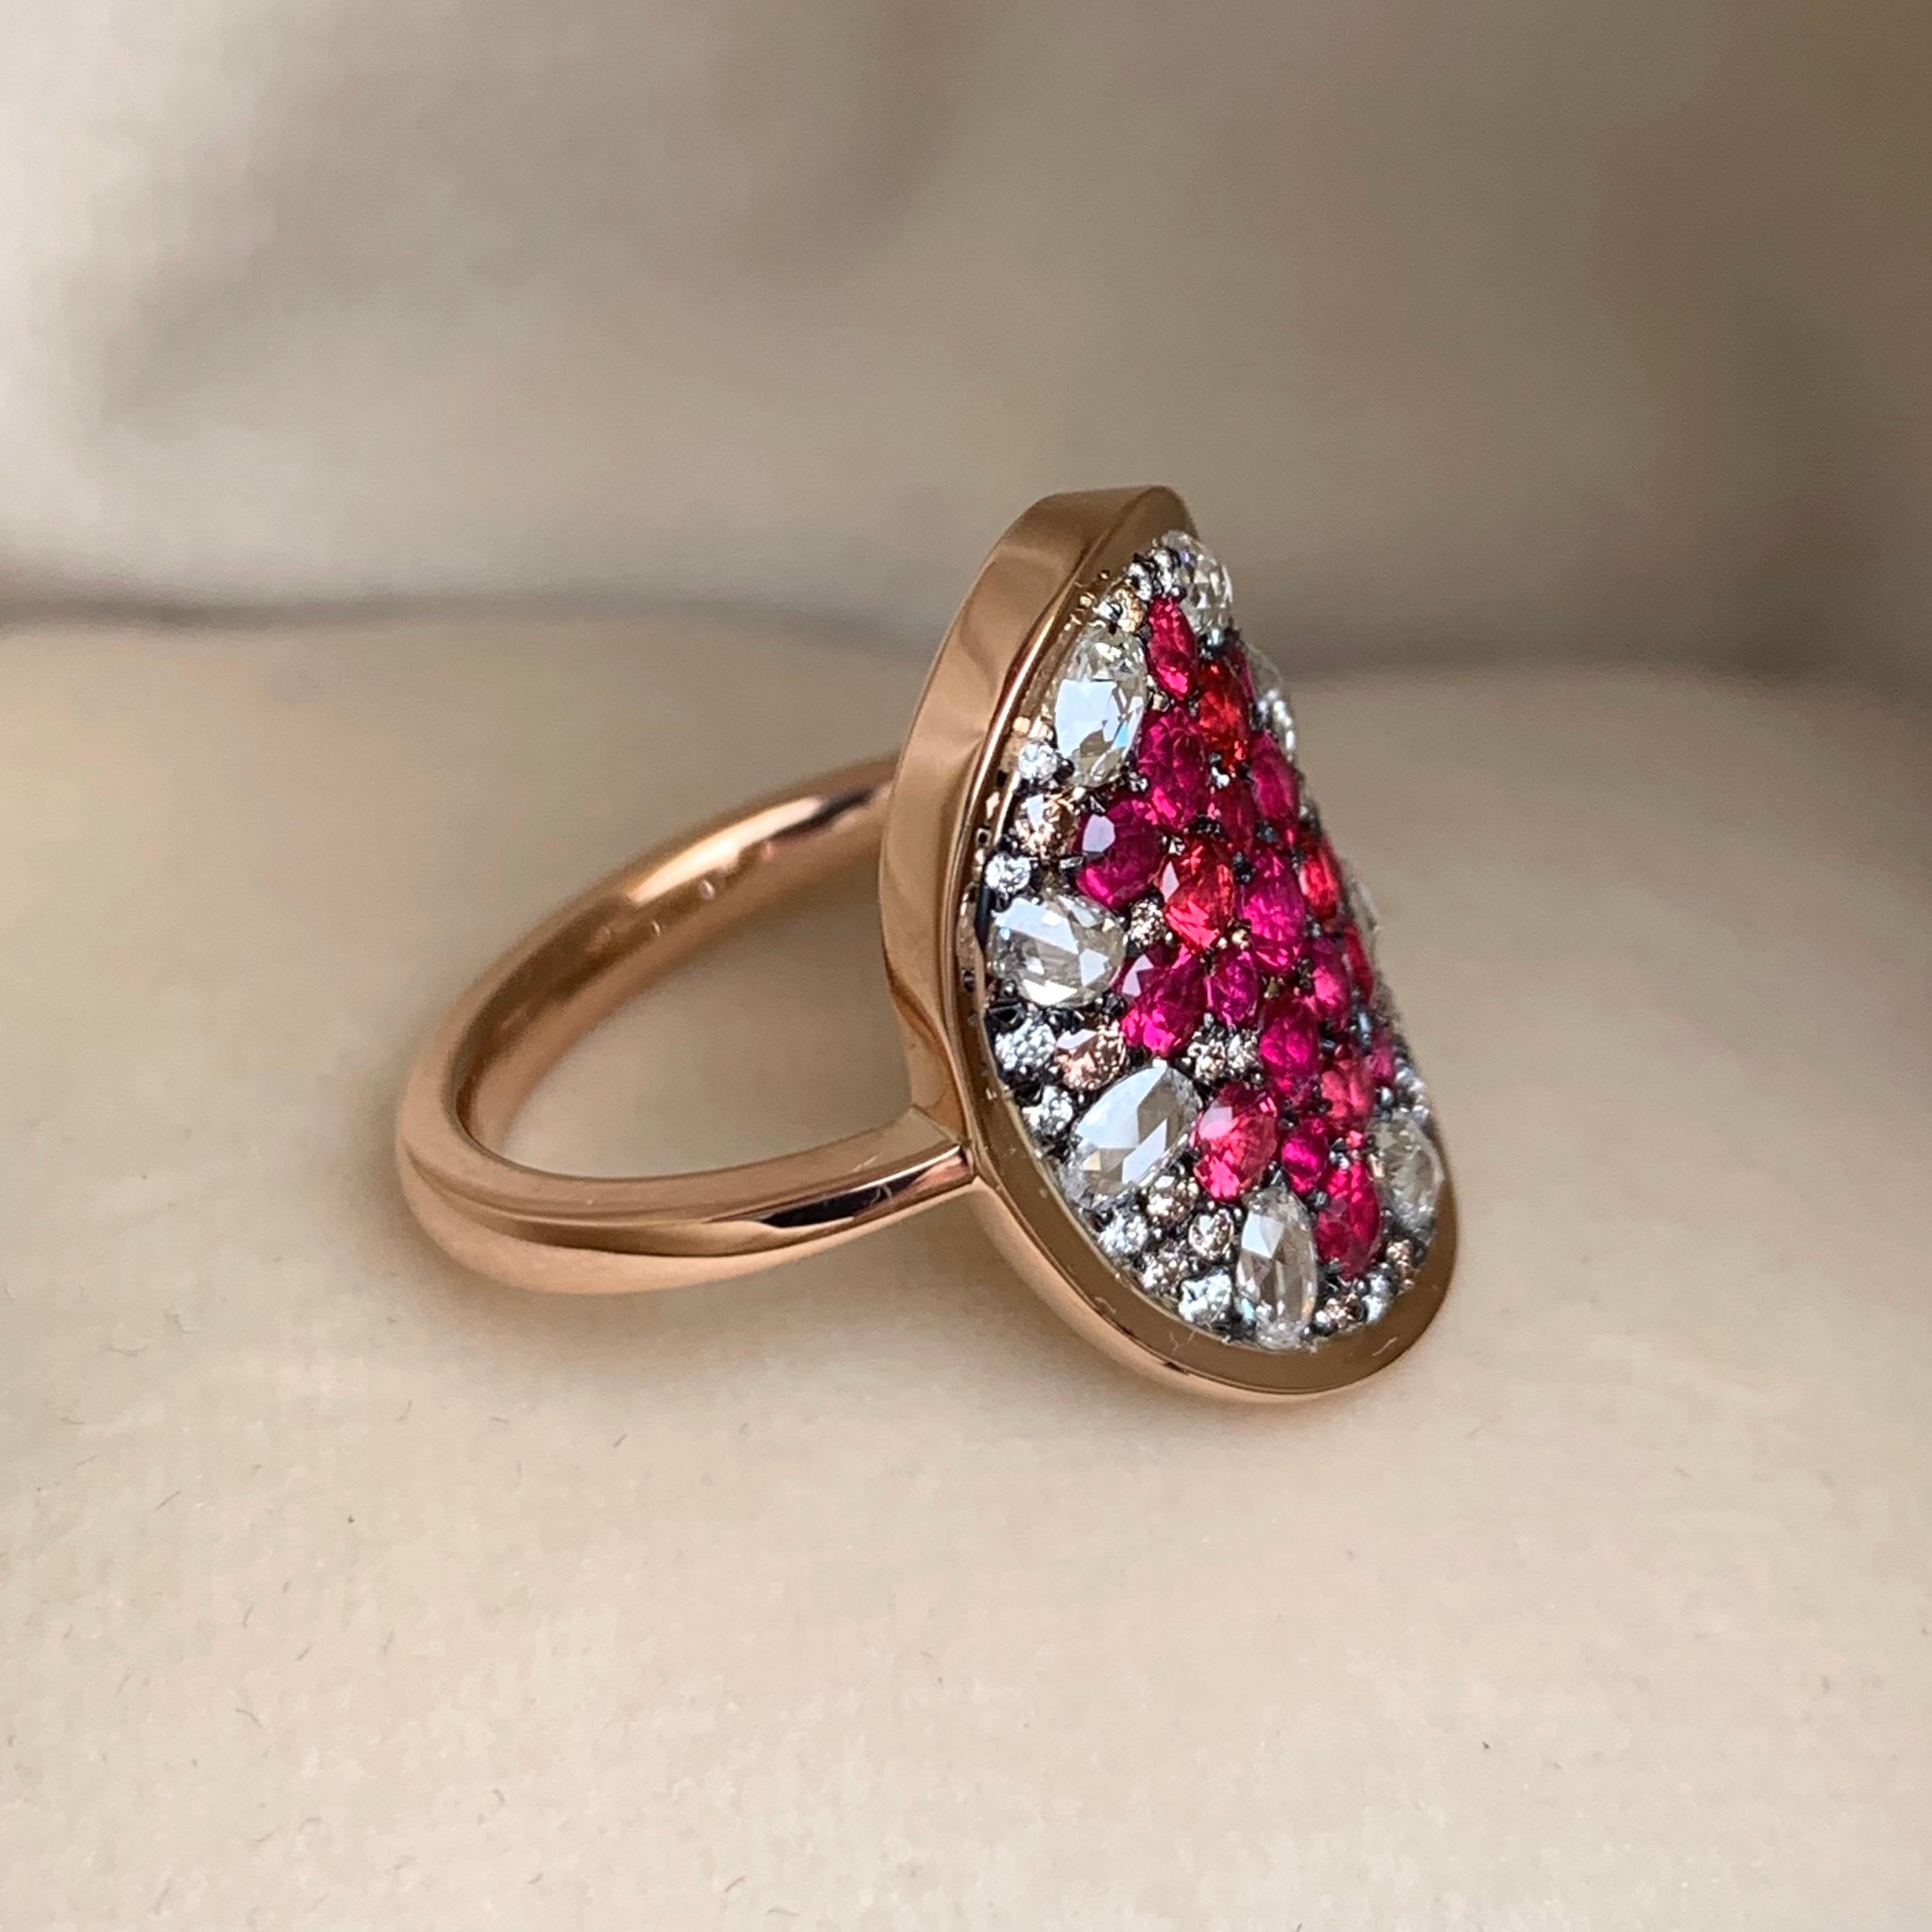 Women's Pigeon's Blood Red Ruby Red Spinel, Pink Diamond and White Rose-Cut Diamond Ring